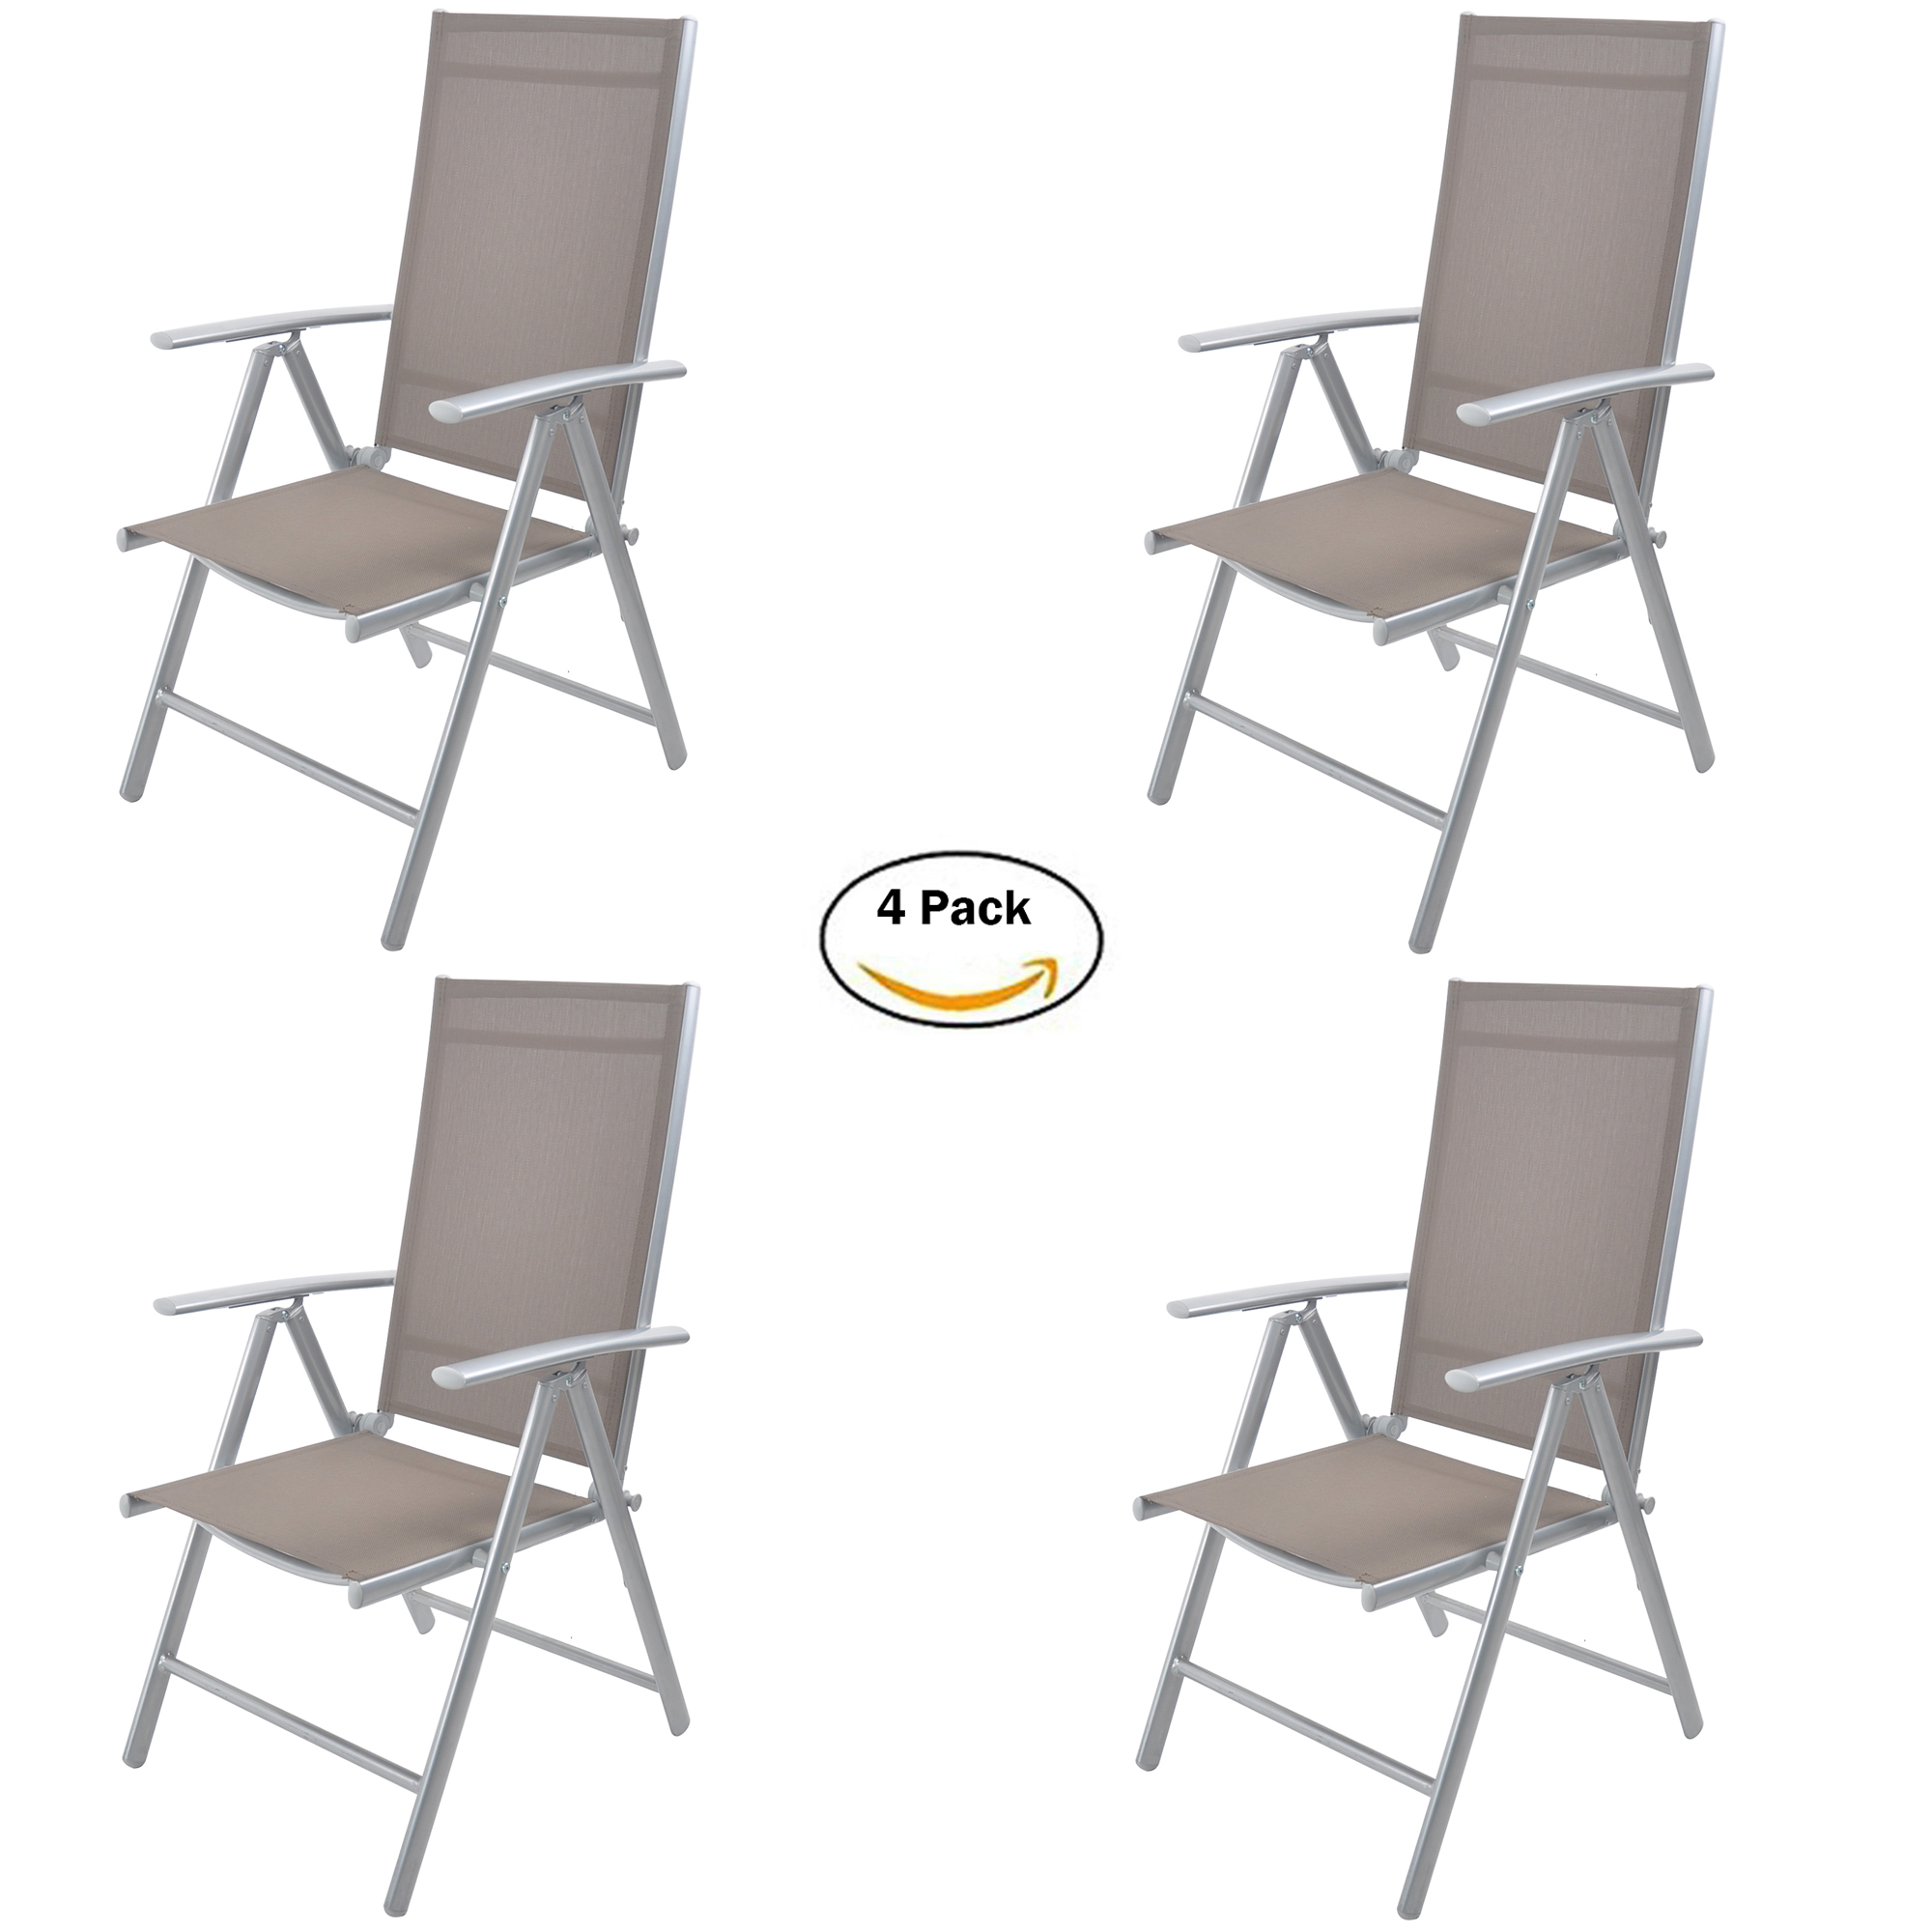 KARMAS PRODUCT 4 PK Patio Dining Chair Folding Chair Outdoor Camp Chairs 7 Position Lay Flat Adjustable,Sturdy and Heavy Duty - image 1 of 7